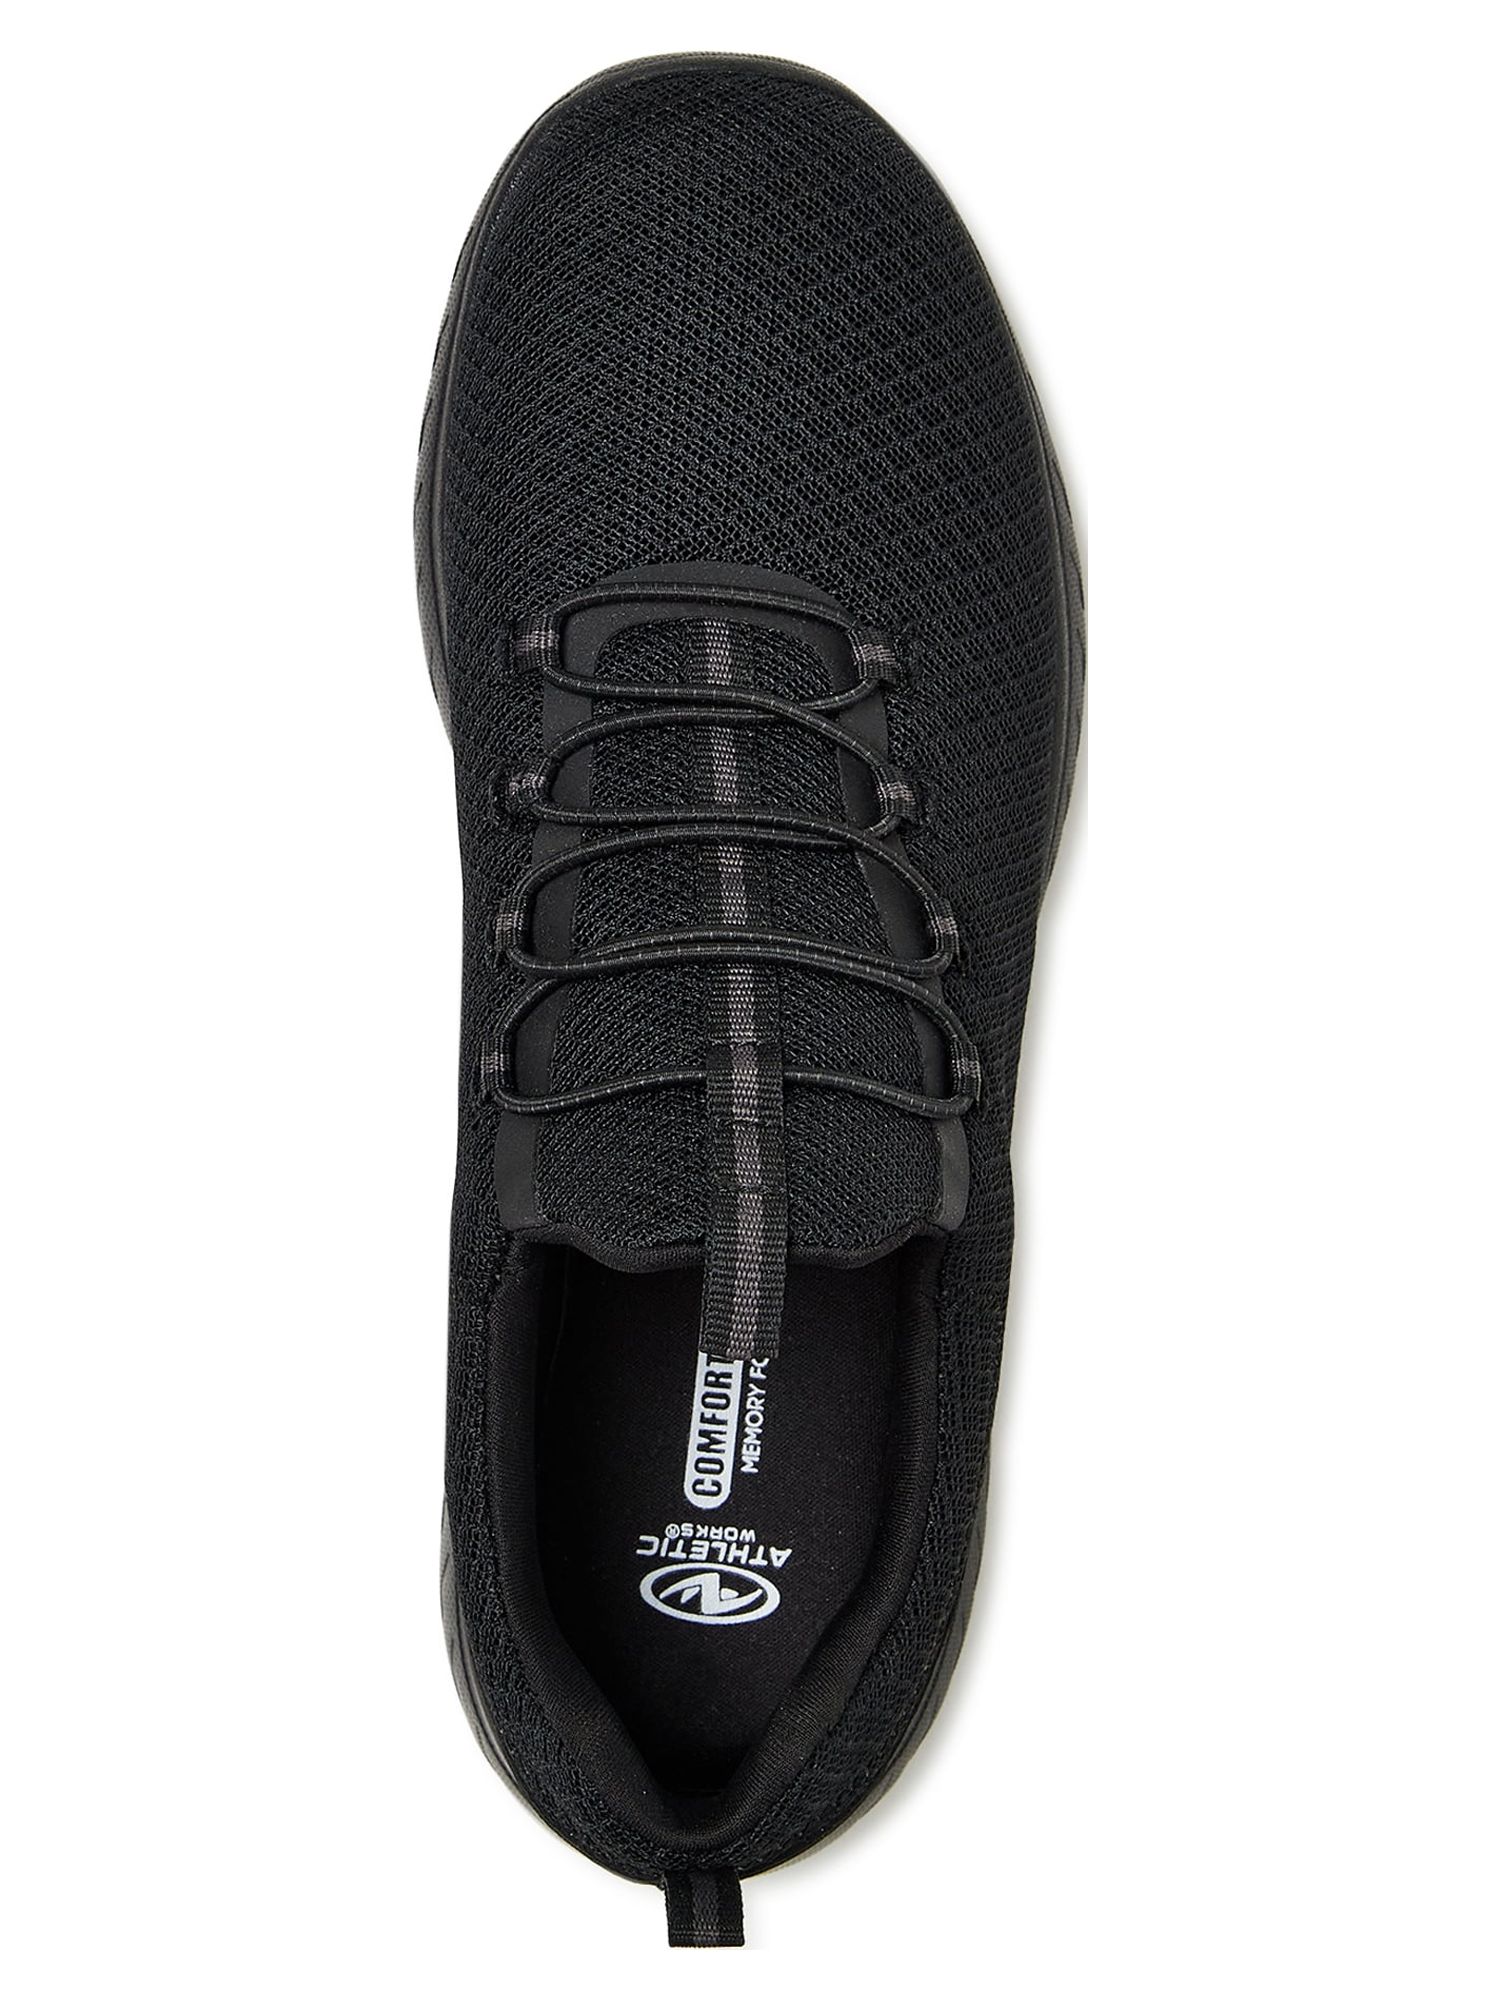 Athletic Works Women’s Bungee Slip On Sneakers, Wide Width Available - image 3 of 5